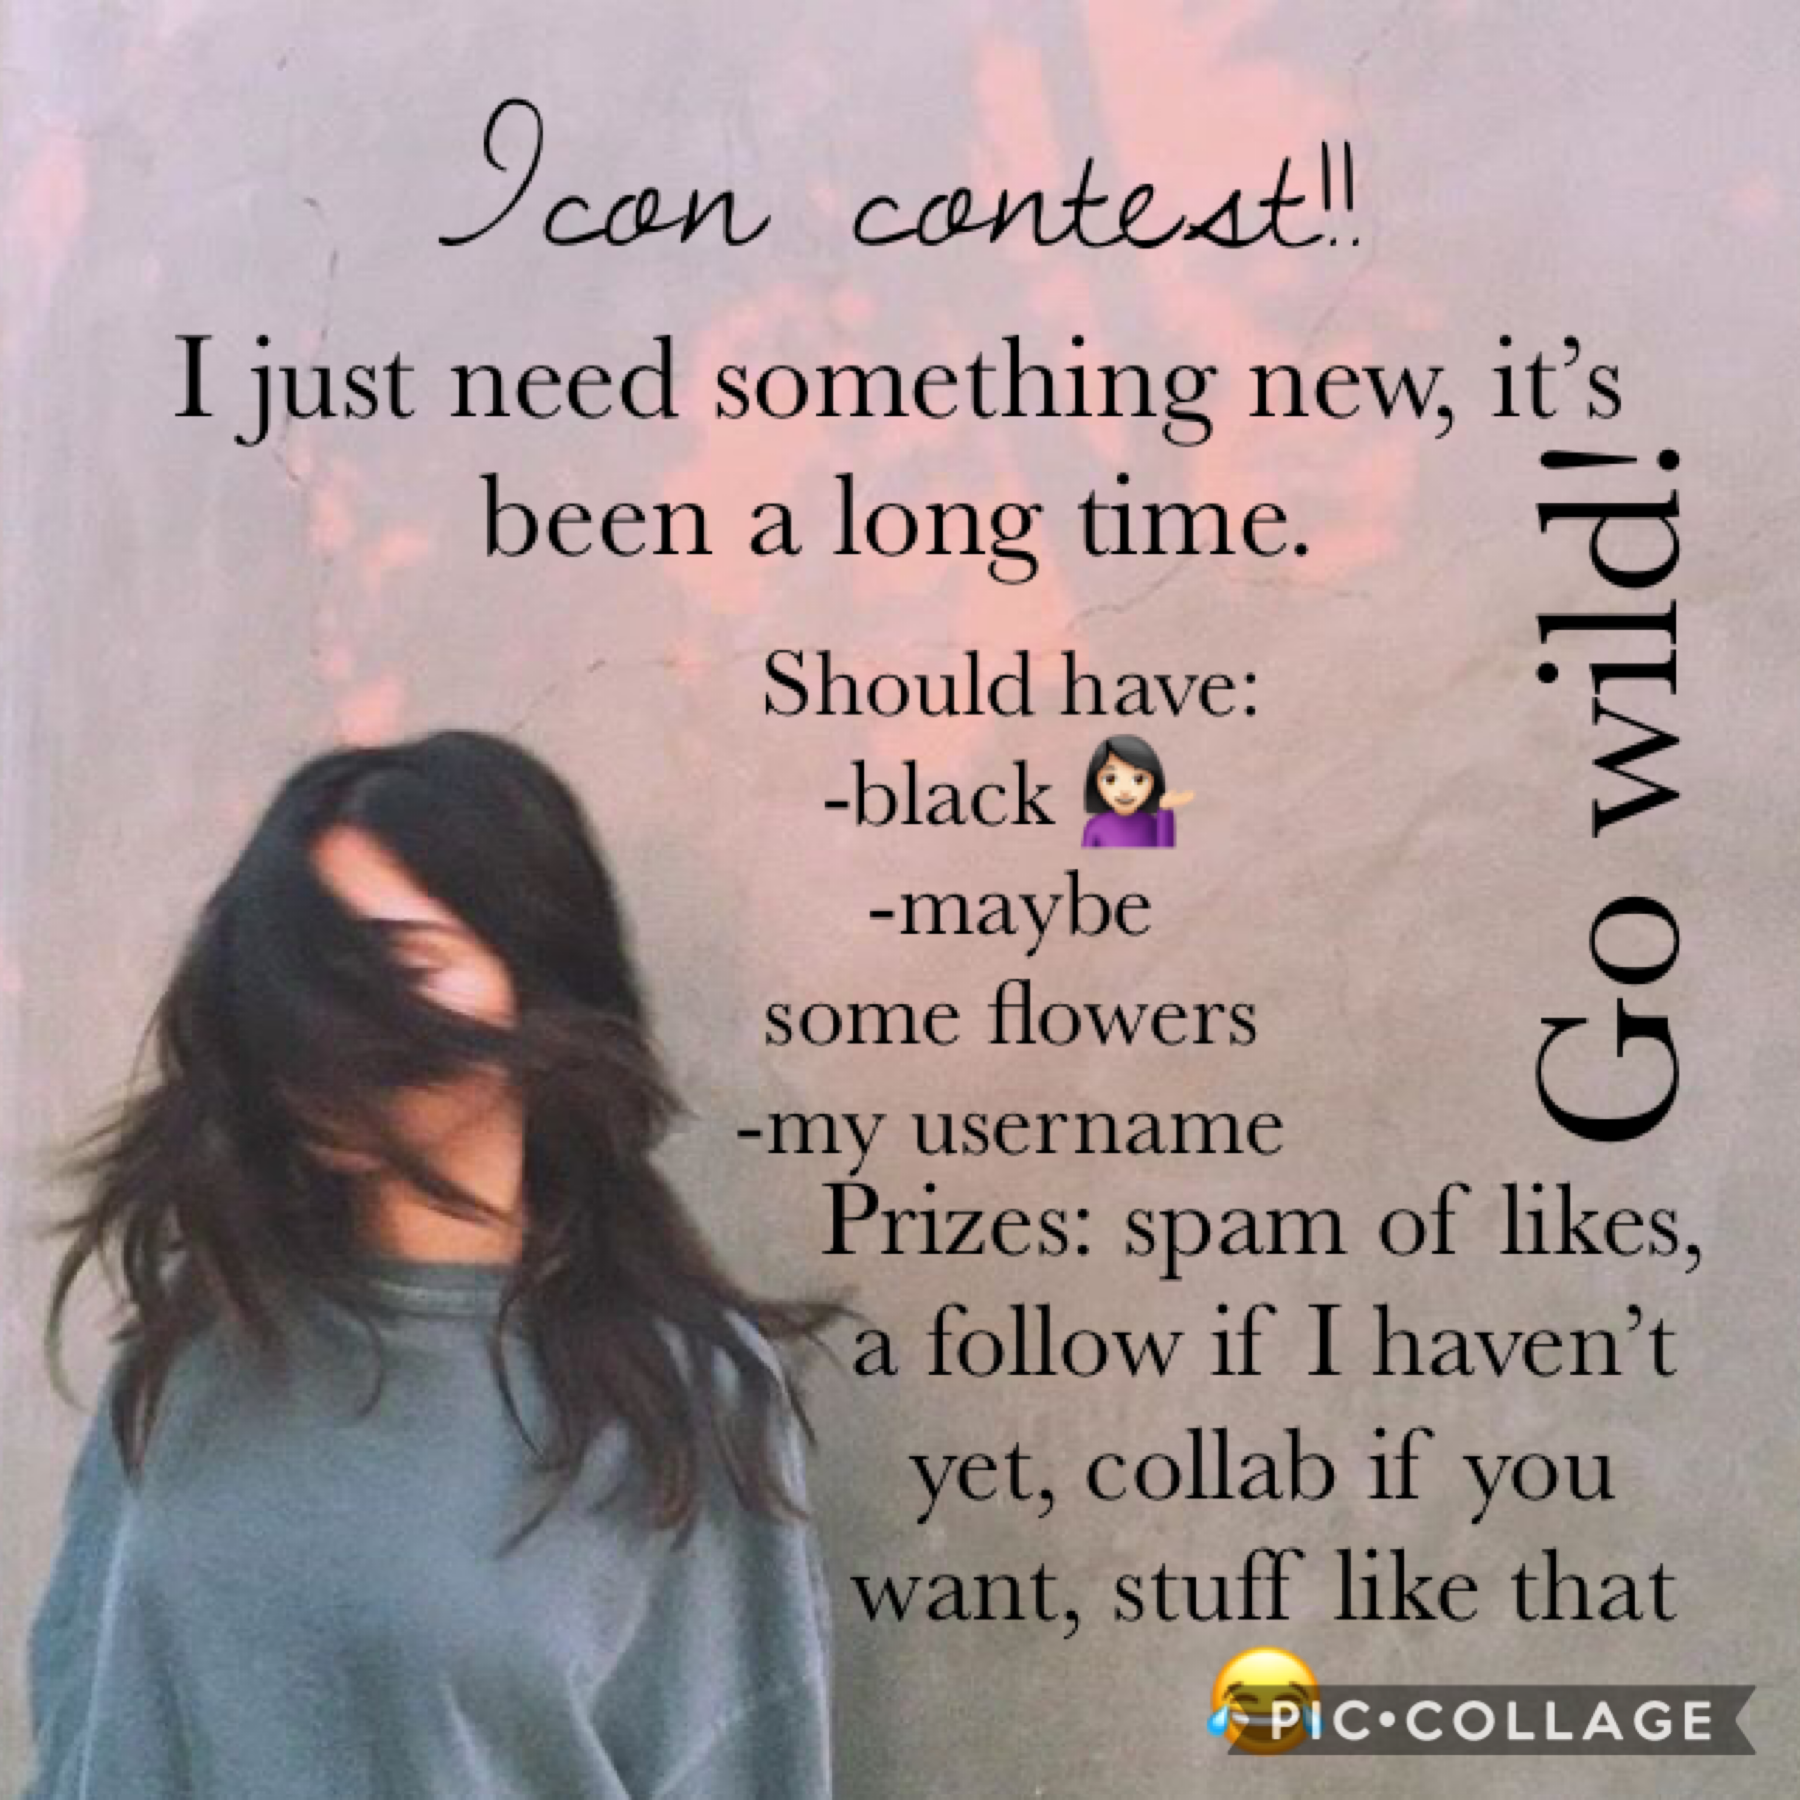 Please enter!! Maybe I can get more people to enter?